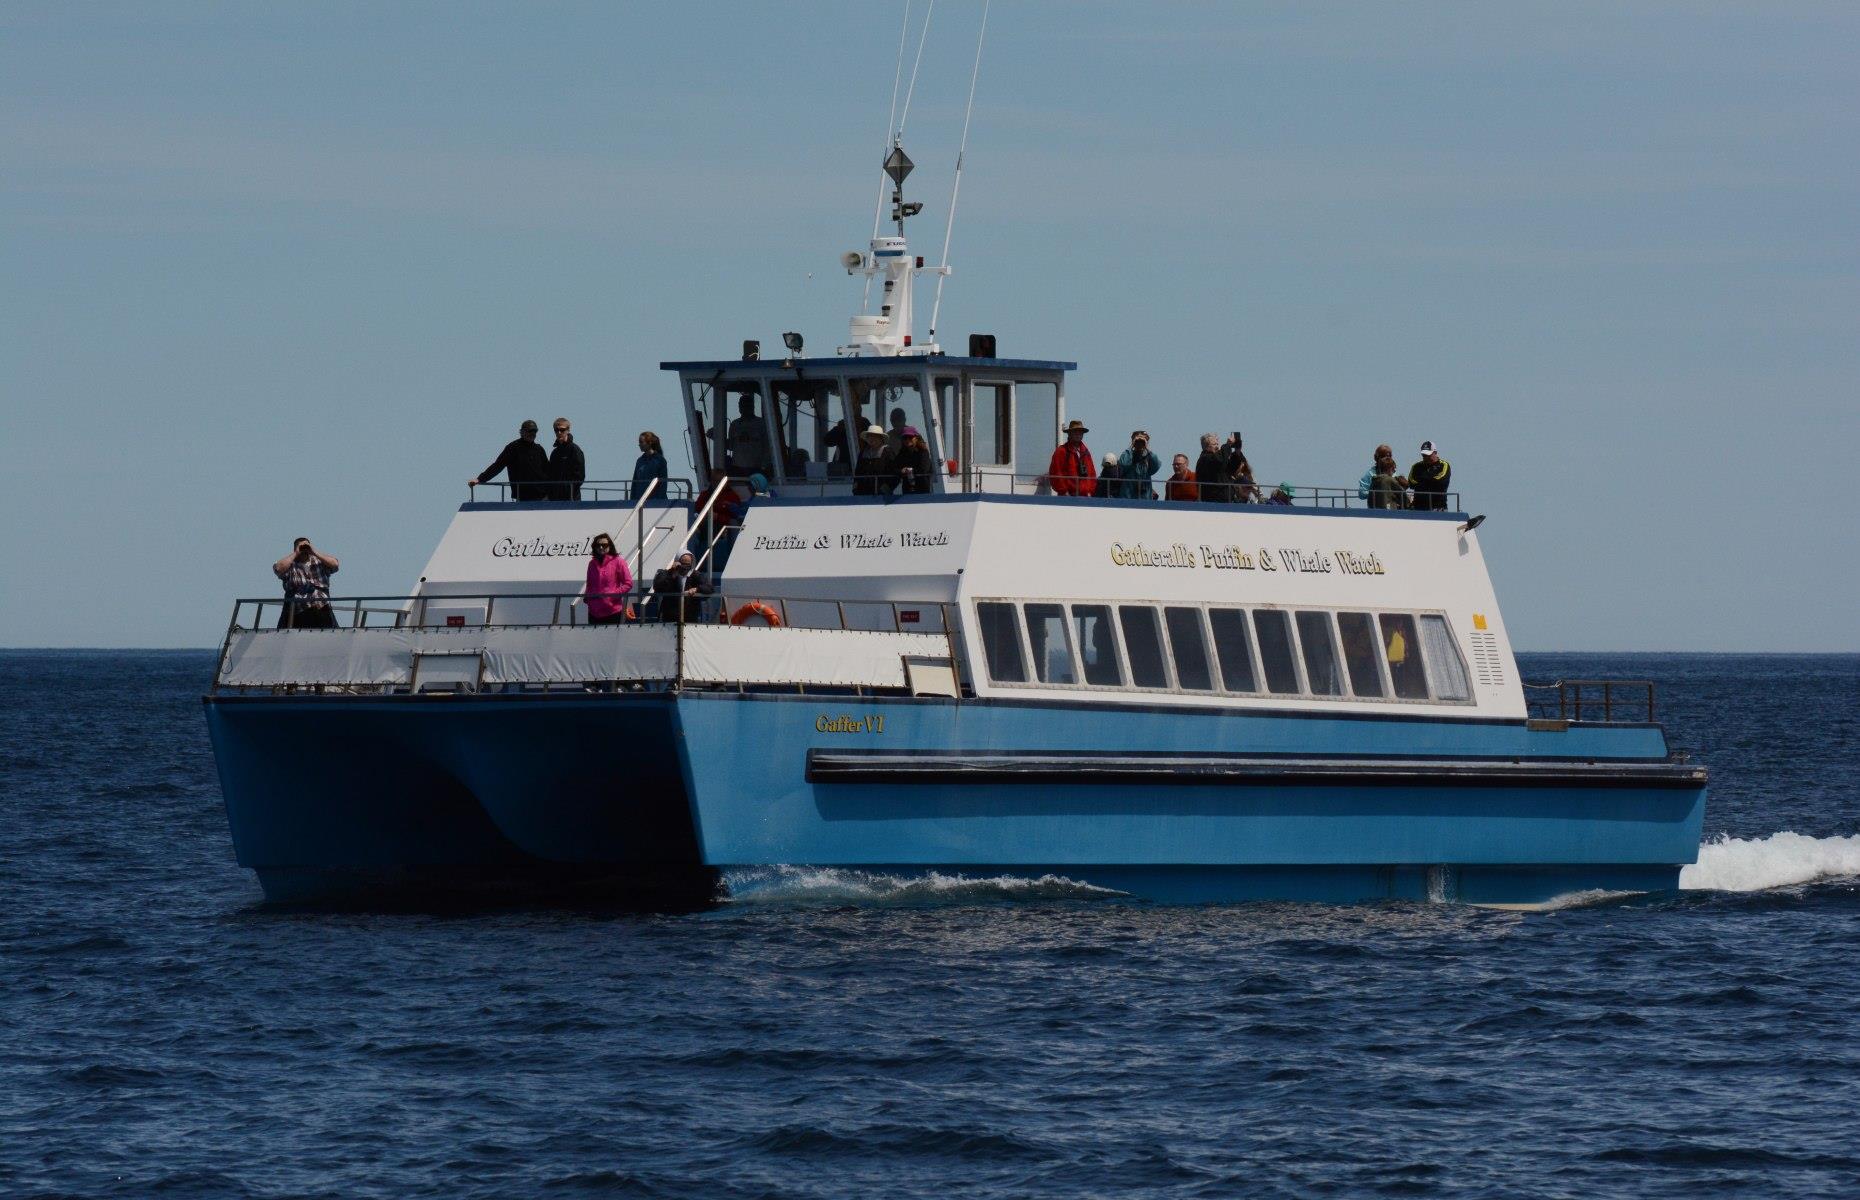 <p>There are a few different tour operators that offer whale-watching catamaran cruises off the coast of the province. Departing from the capital daily, the <a href="https://www.trailfinders.com/tours/canada-and-alaska/atlantic-canada/tour-st-john-s-whale-watch-cruise">St John’s Whale Watch Cruise</a> negotiates foreboding fields of 12,000-year-old icebergs to transport visitors past nesting puffin colonies in search of the highly anticipated humpbacks. At Bay Bulls, the family-run <a href="https://www.gatheralls.com/">Gatherall’s Puffin and Whale Watch Cruise</a> is one of the top-rated Newfoundland whale experiences on TripAdvisor, whisking passengers around the islands of Witless Bay Ecological Reserve. Kayak tours are possible too, for the slightly more adventurous.</p>